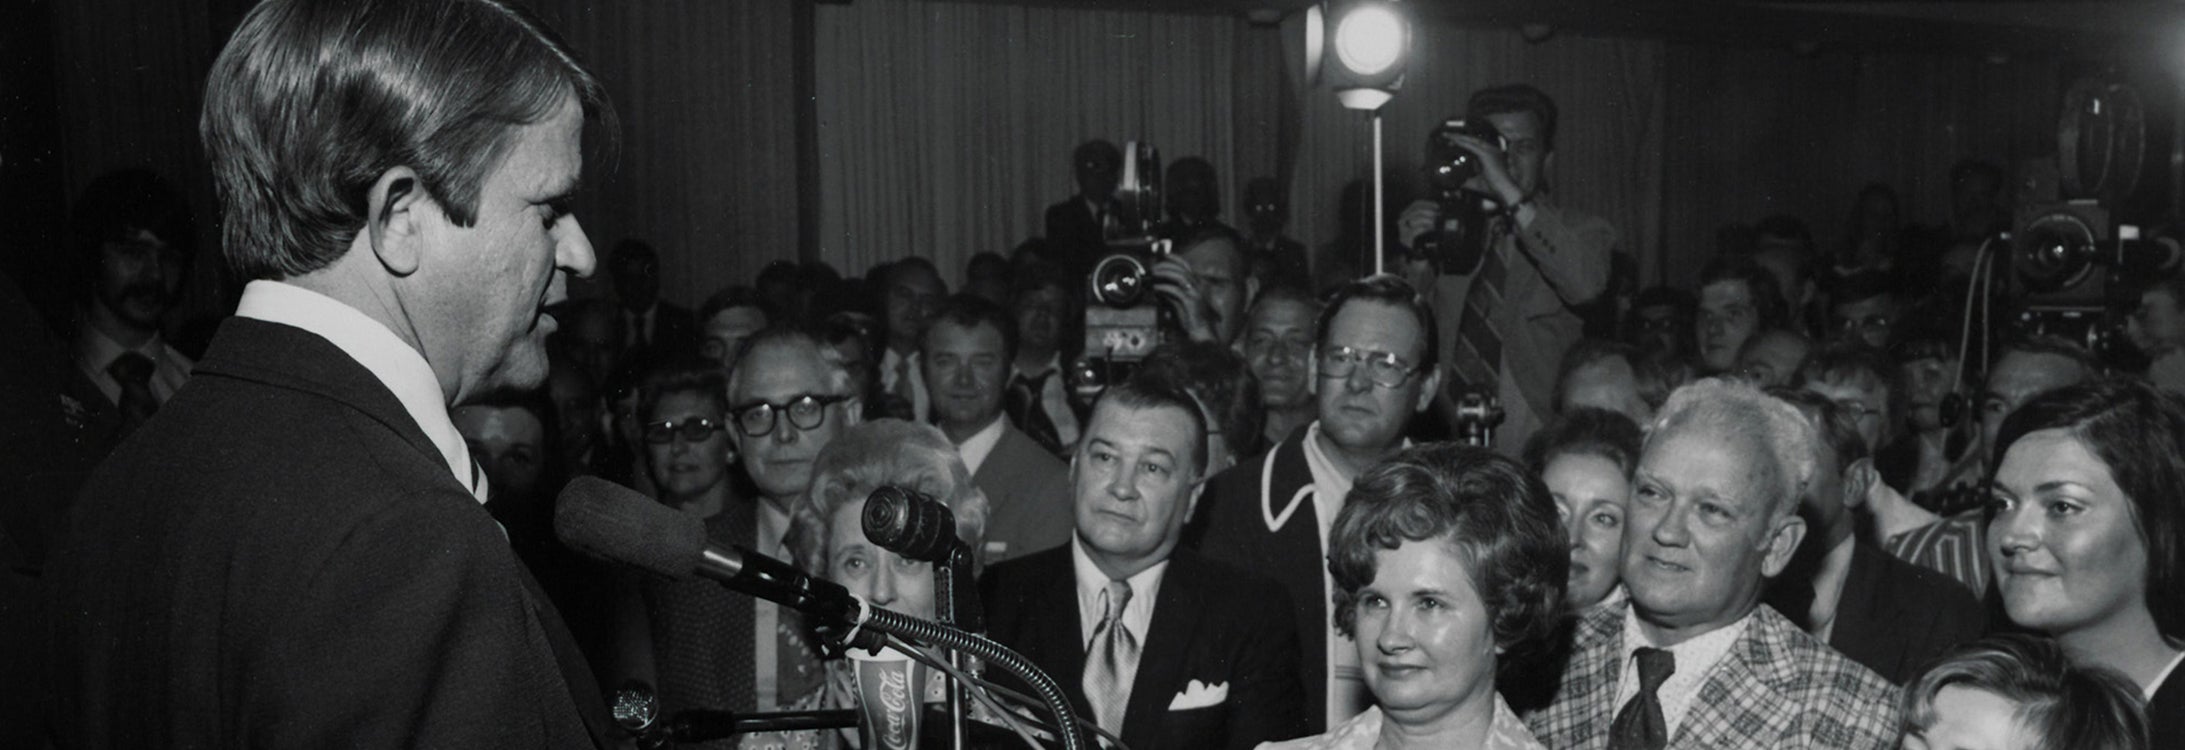 Robert Morgan speaks to a crowd in Raleigh at a primary event for the U.S. Senate election of 1974. (Photos from ECU Digital Collections)